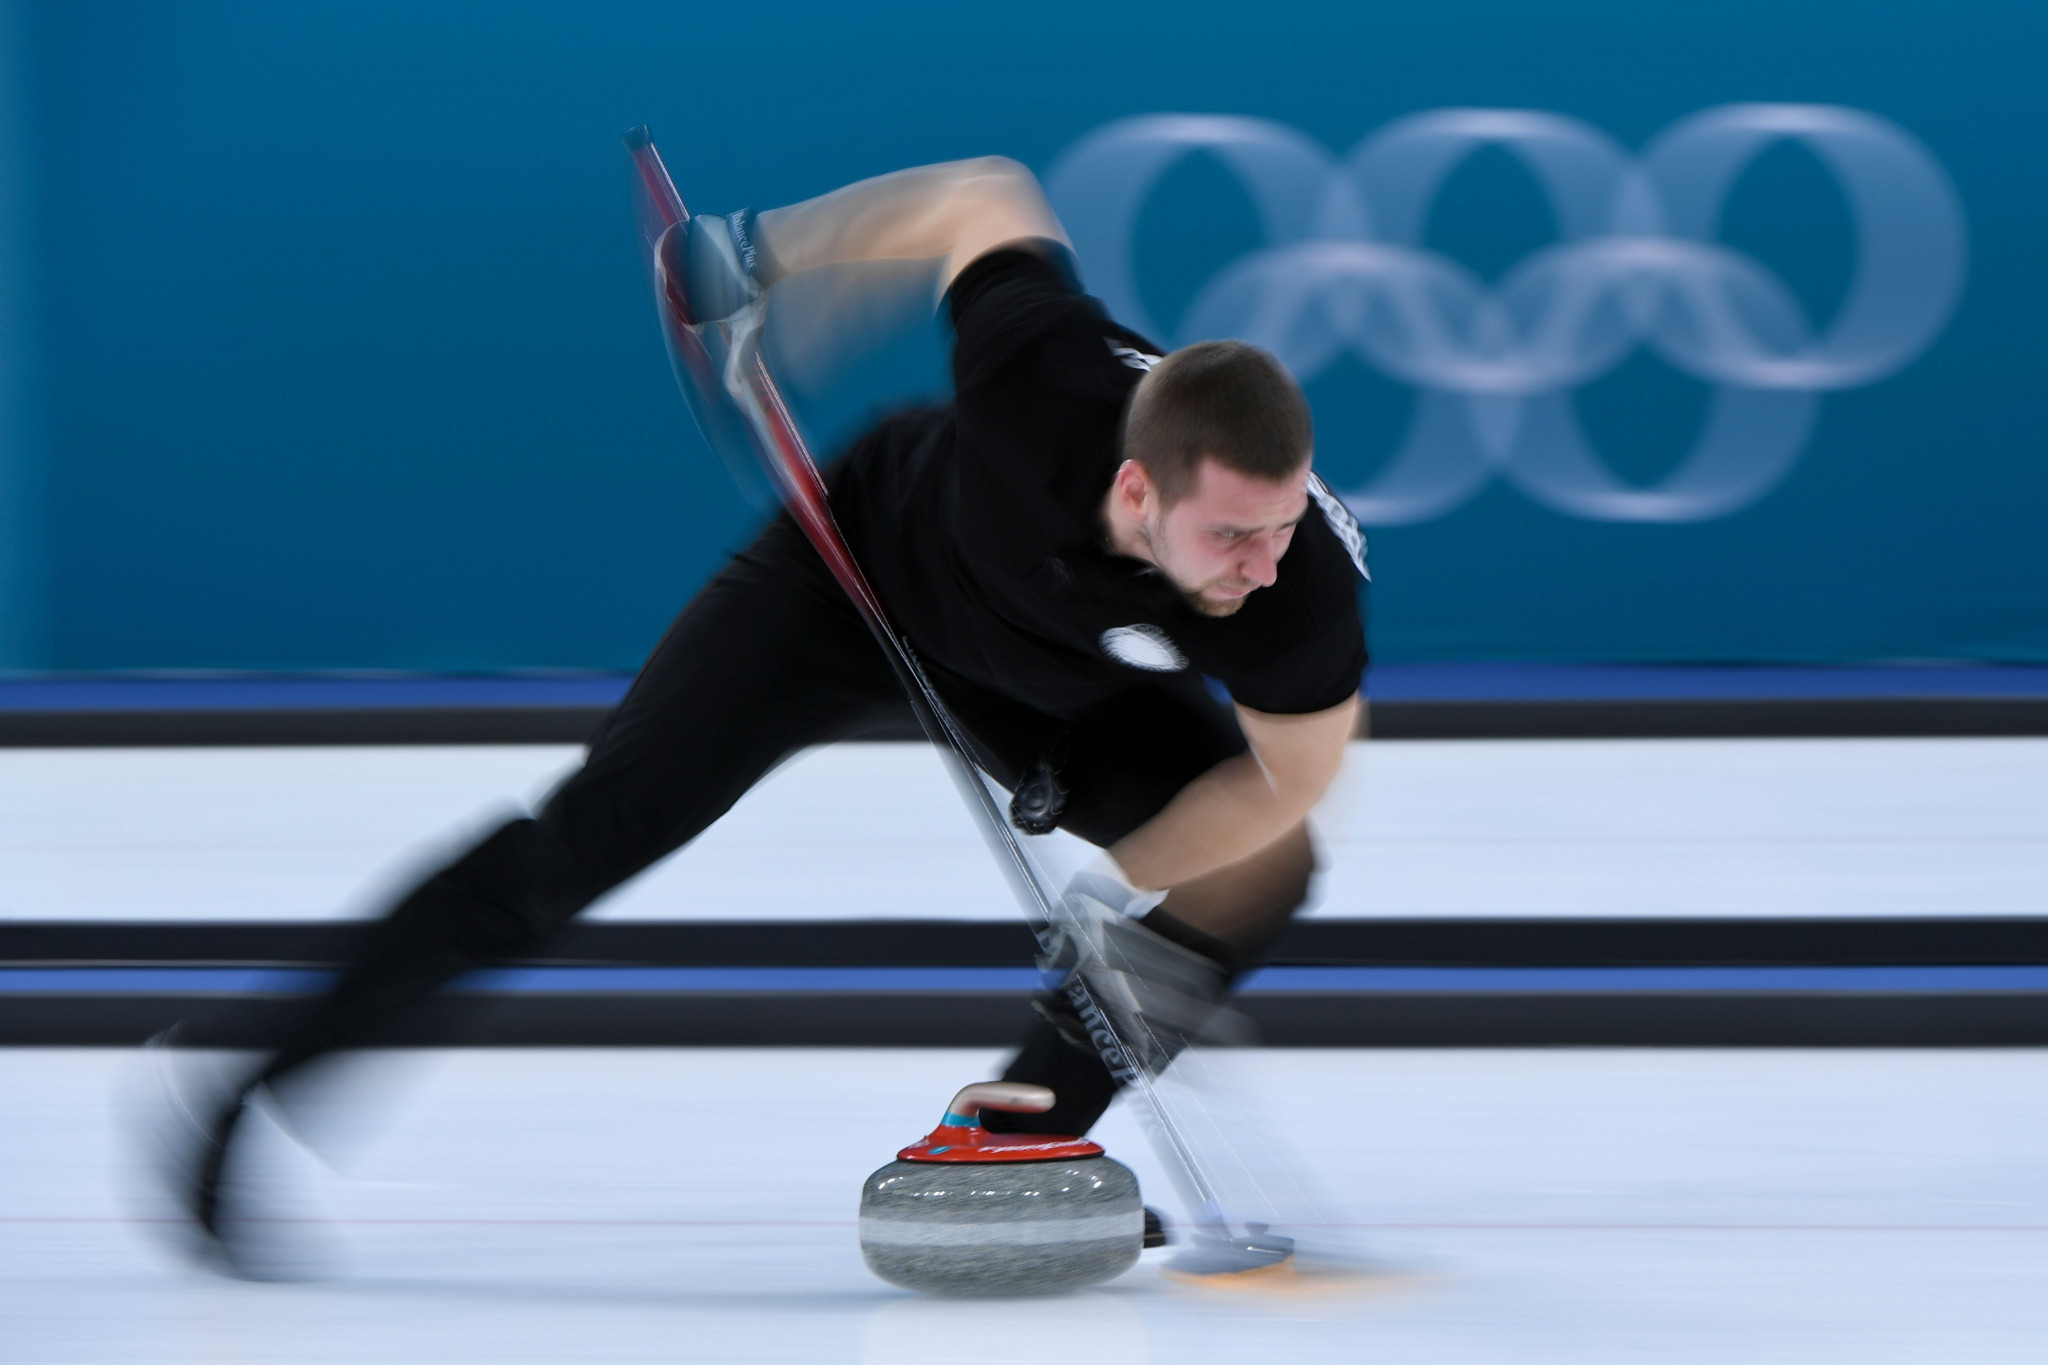 Neutral Russian curler Aleksandr Krushelnitckii failed a drugs test in one of the Games' big stories ©Getty Images